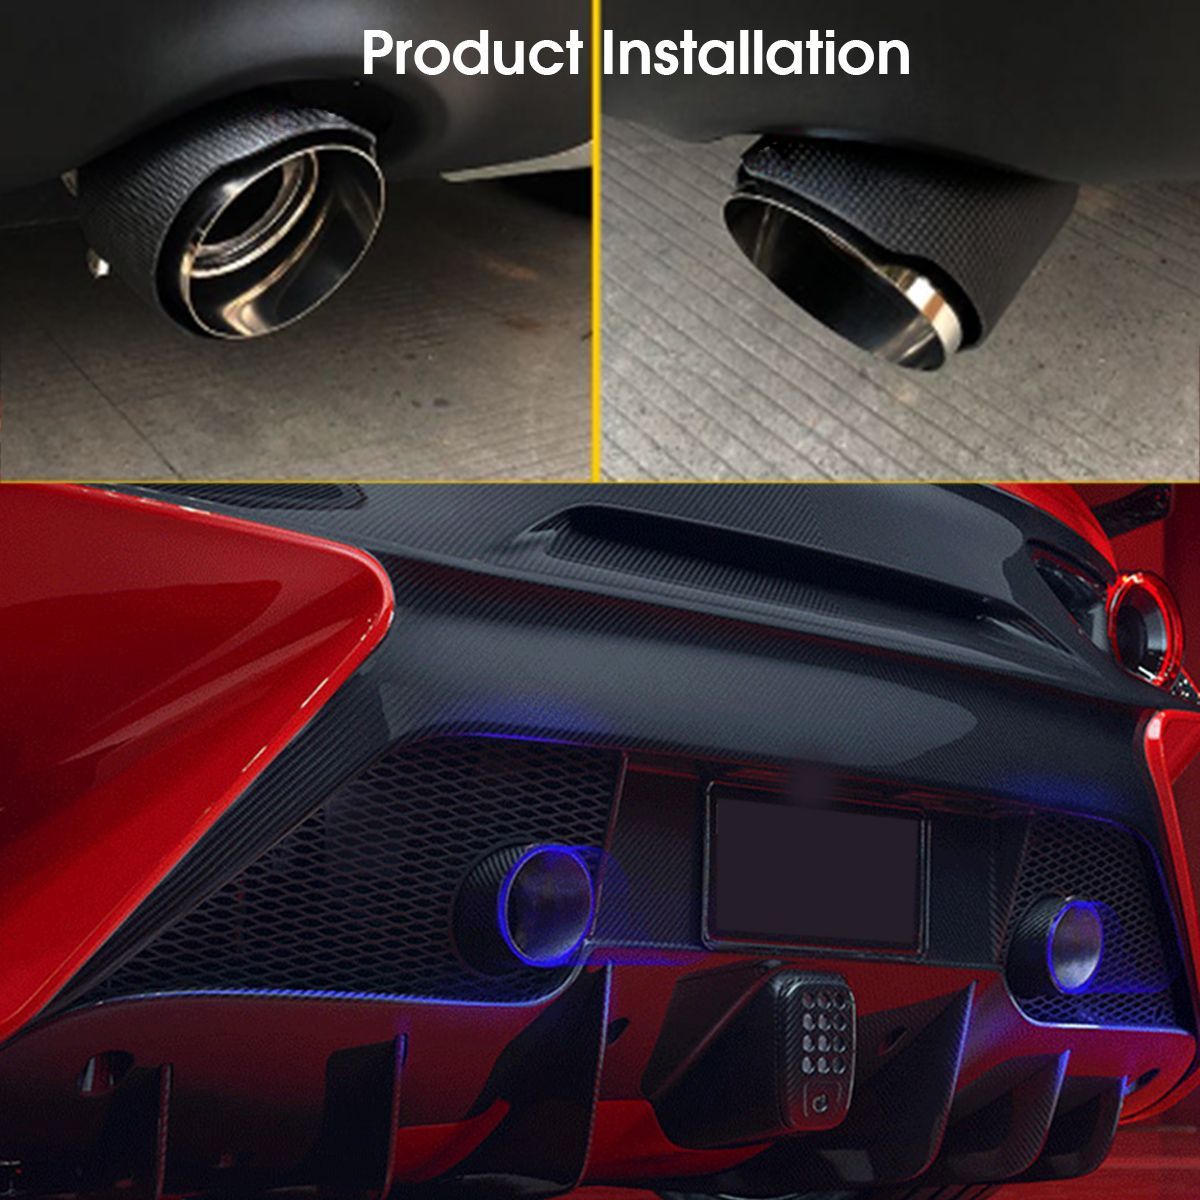 Matte-Carbon-Fiber-Car-Exhaust-Pipe-Tail-Muffler-Tip-LED-Light-63mm-IN-89mm-OUT-1701263